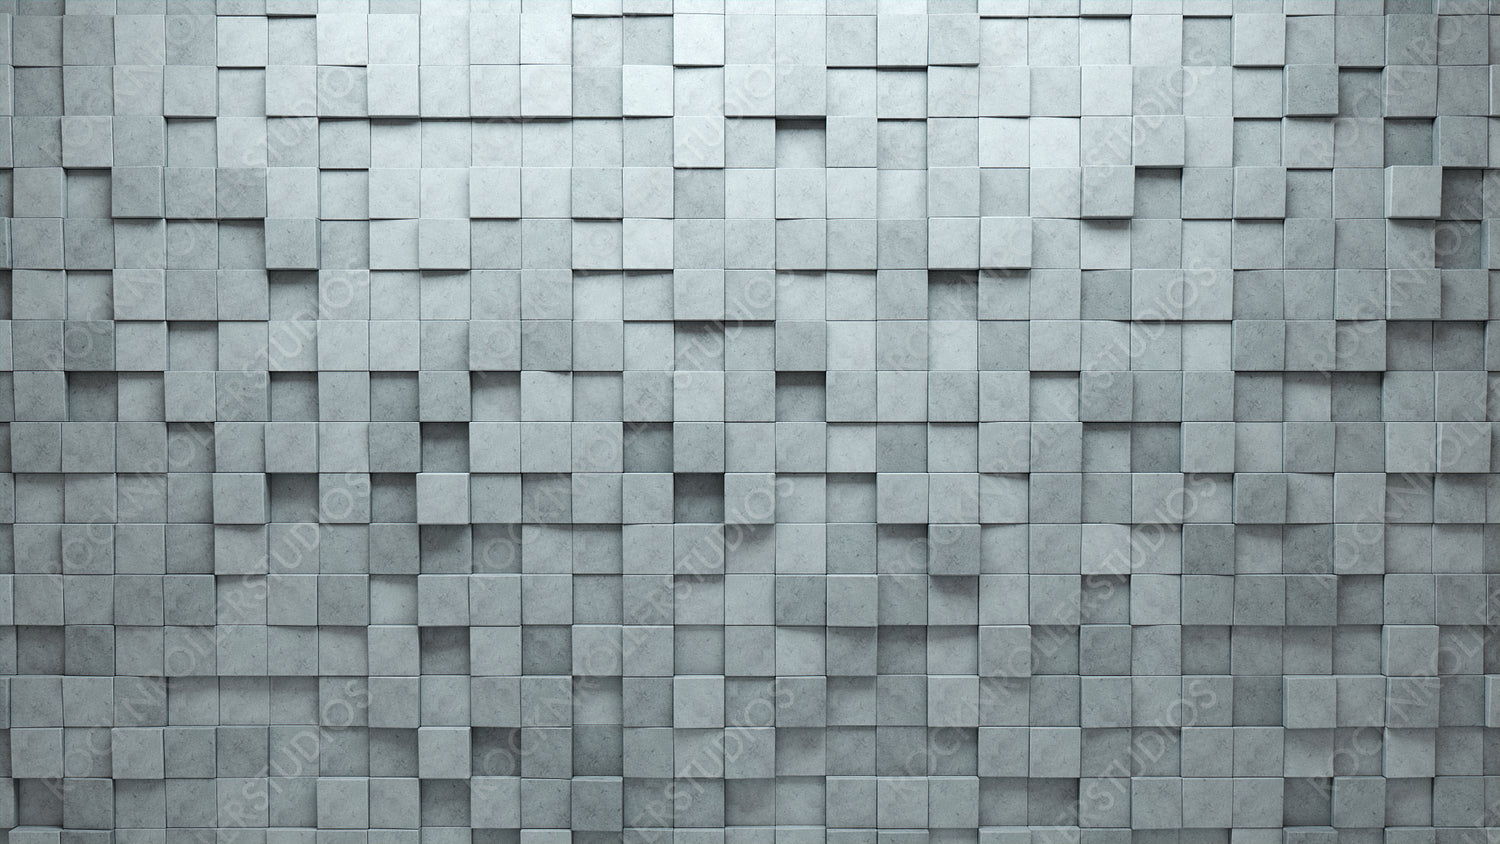 Polished, Concrete Mosaic Tiles arranged in the shape of a wall. Semigloss, Square, Bricks stacked to create a 3D block background. 3D Render